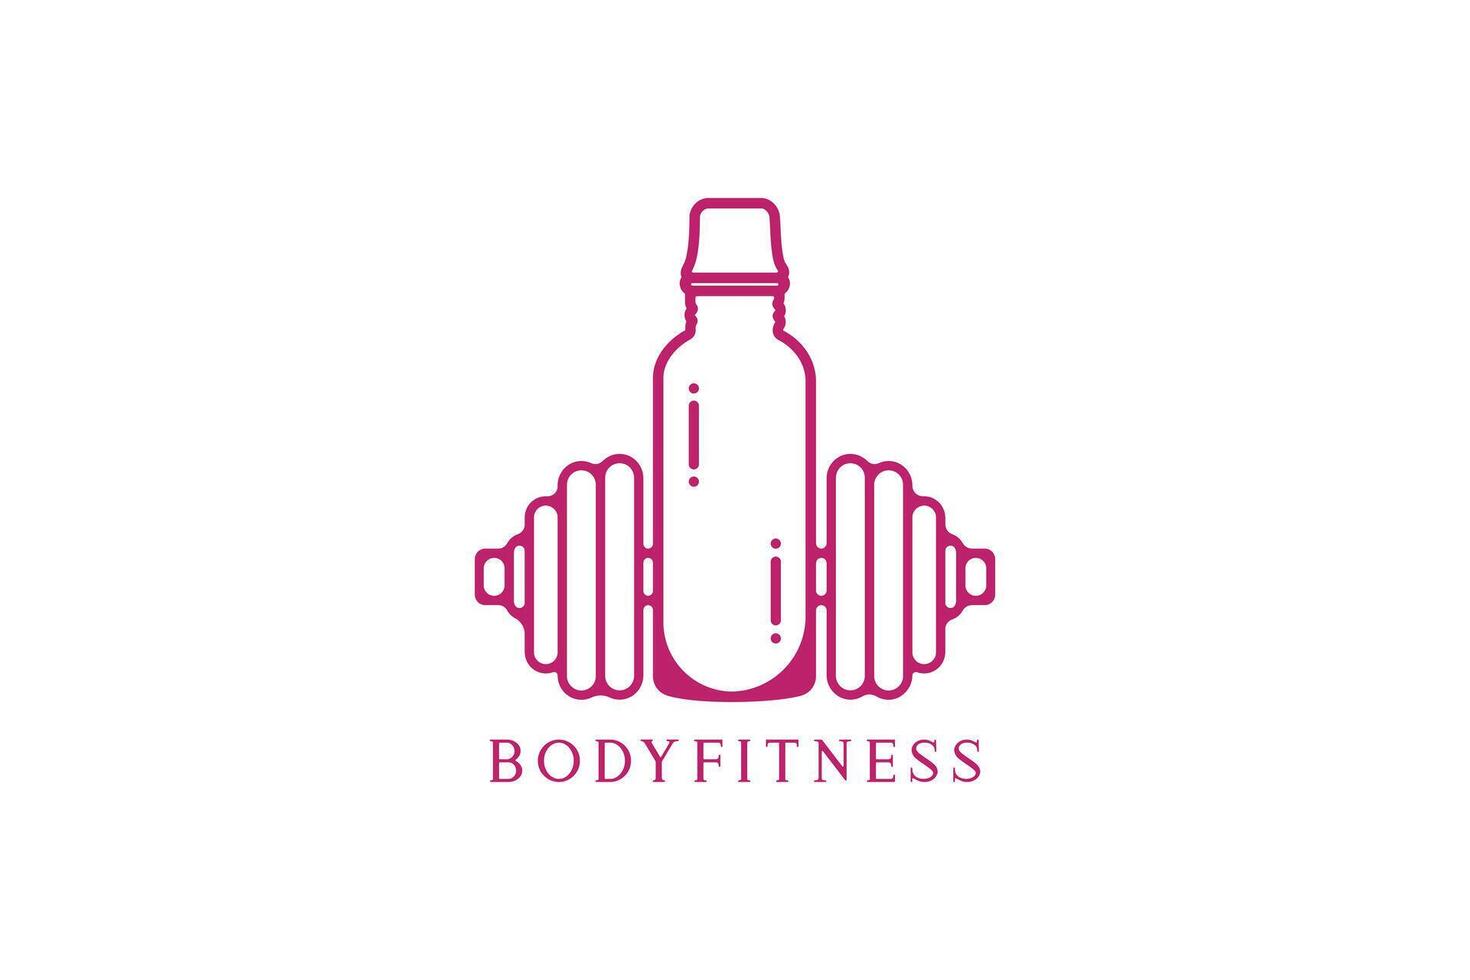 Gym Exercise Dumbbell with Water Bottle logo icon. Gym fitness icon design concept. Bottle water gym with weight icon design. vector